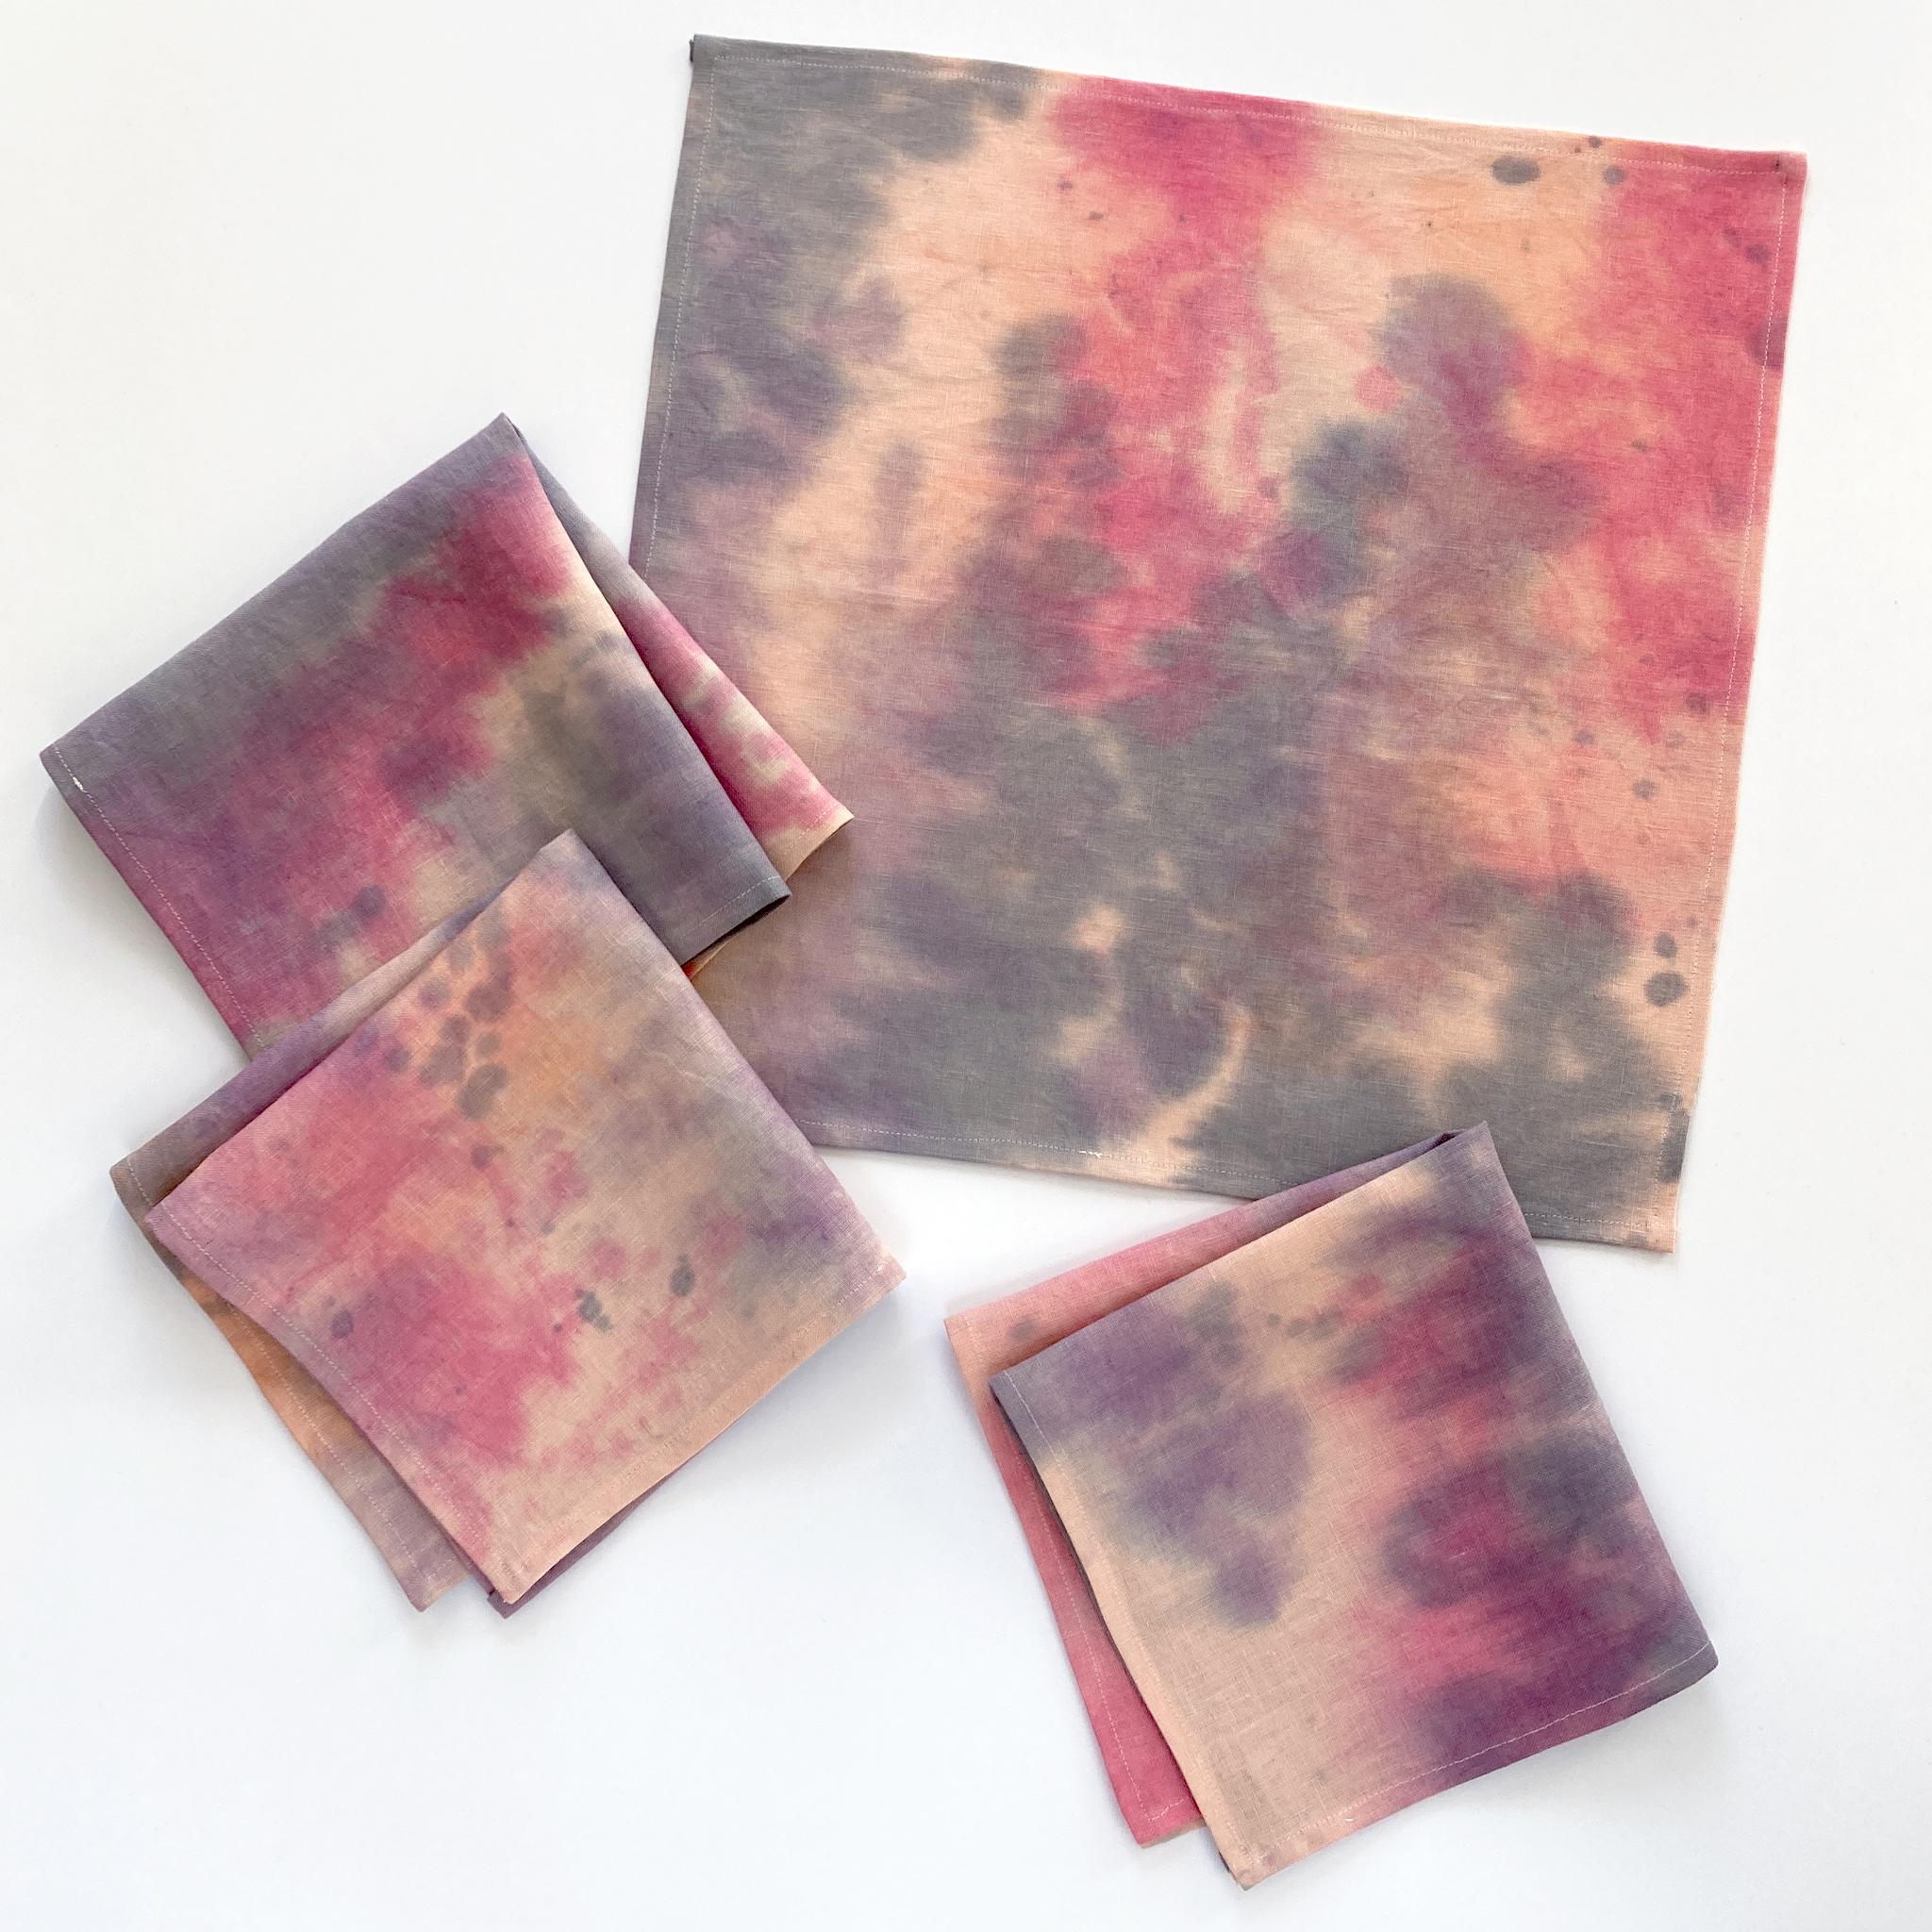 Rose linen napkins, set of four, with pink, grey and peach abstract pattern. Hand-painted and sewn in New York City. Each napkin measures approximately 18 x 18 inches. Each linen napkin is hand dyed and one of a kind. 

This series is inspired by